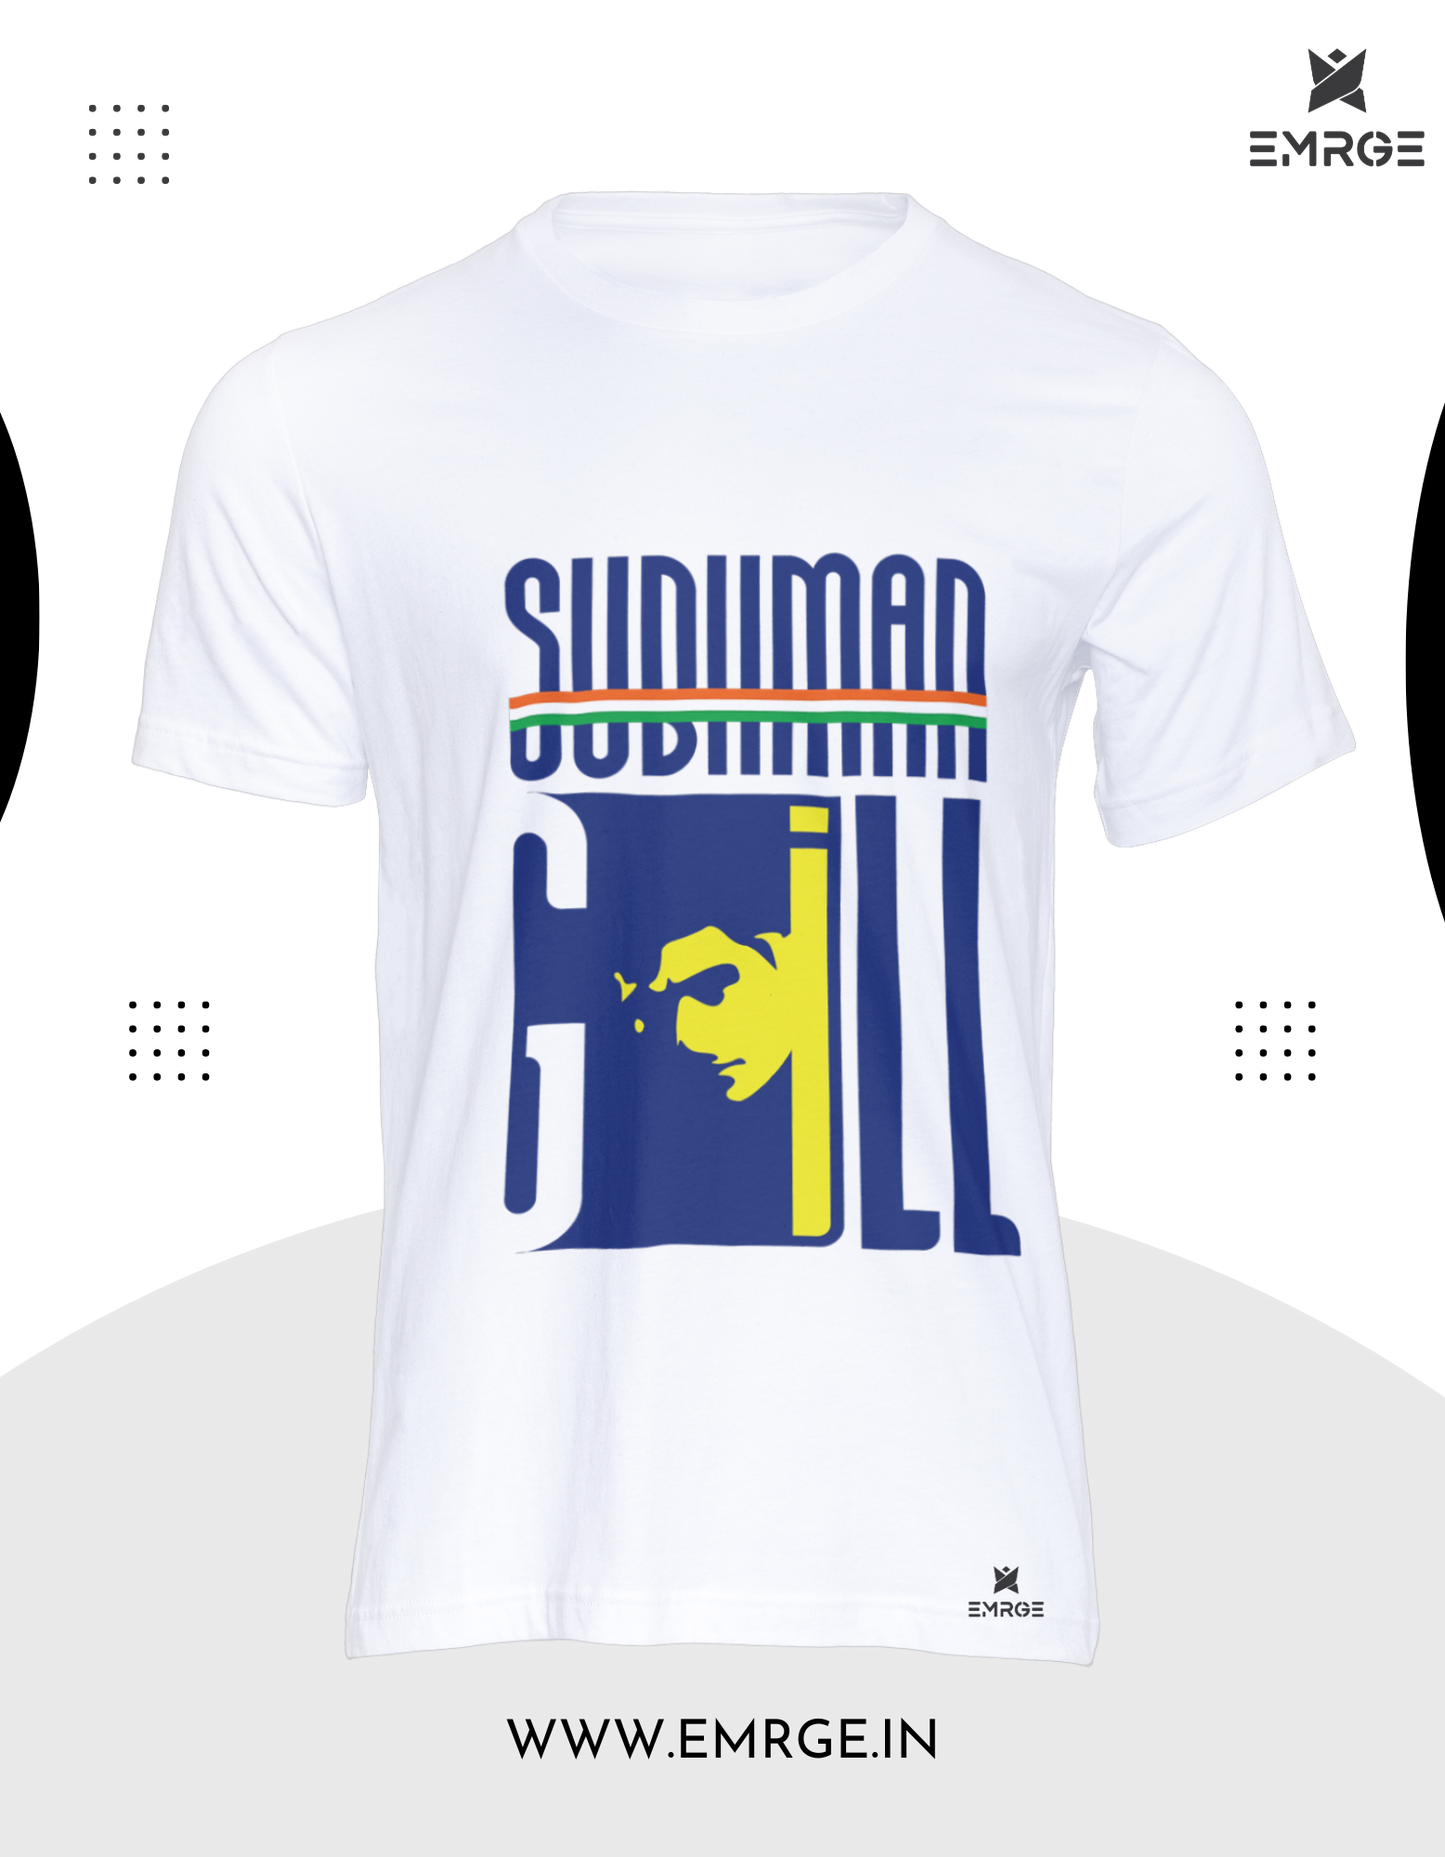 World Cup Special: Shubman Gill Branded T-Shirt Available on Multiple Colors